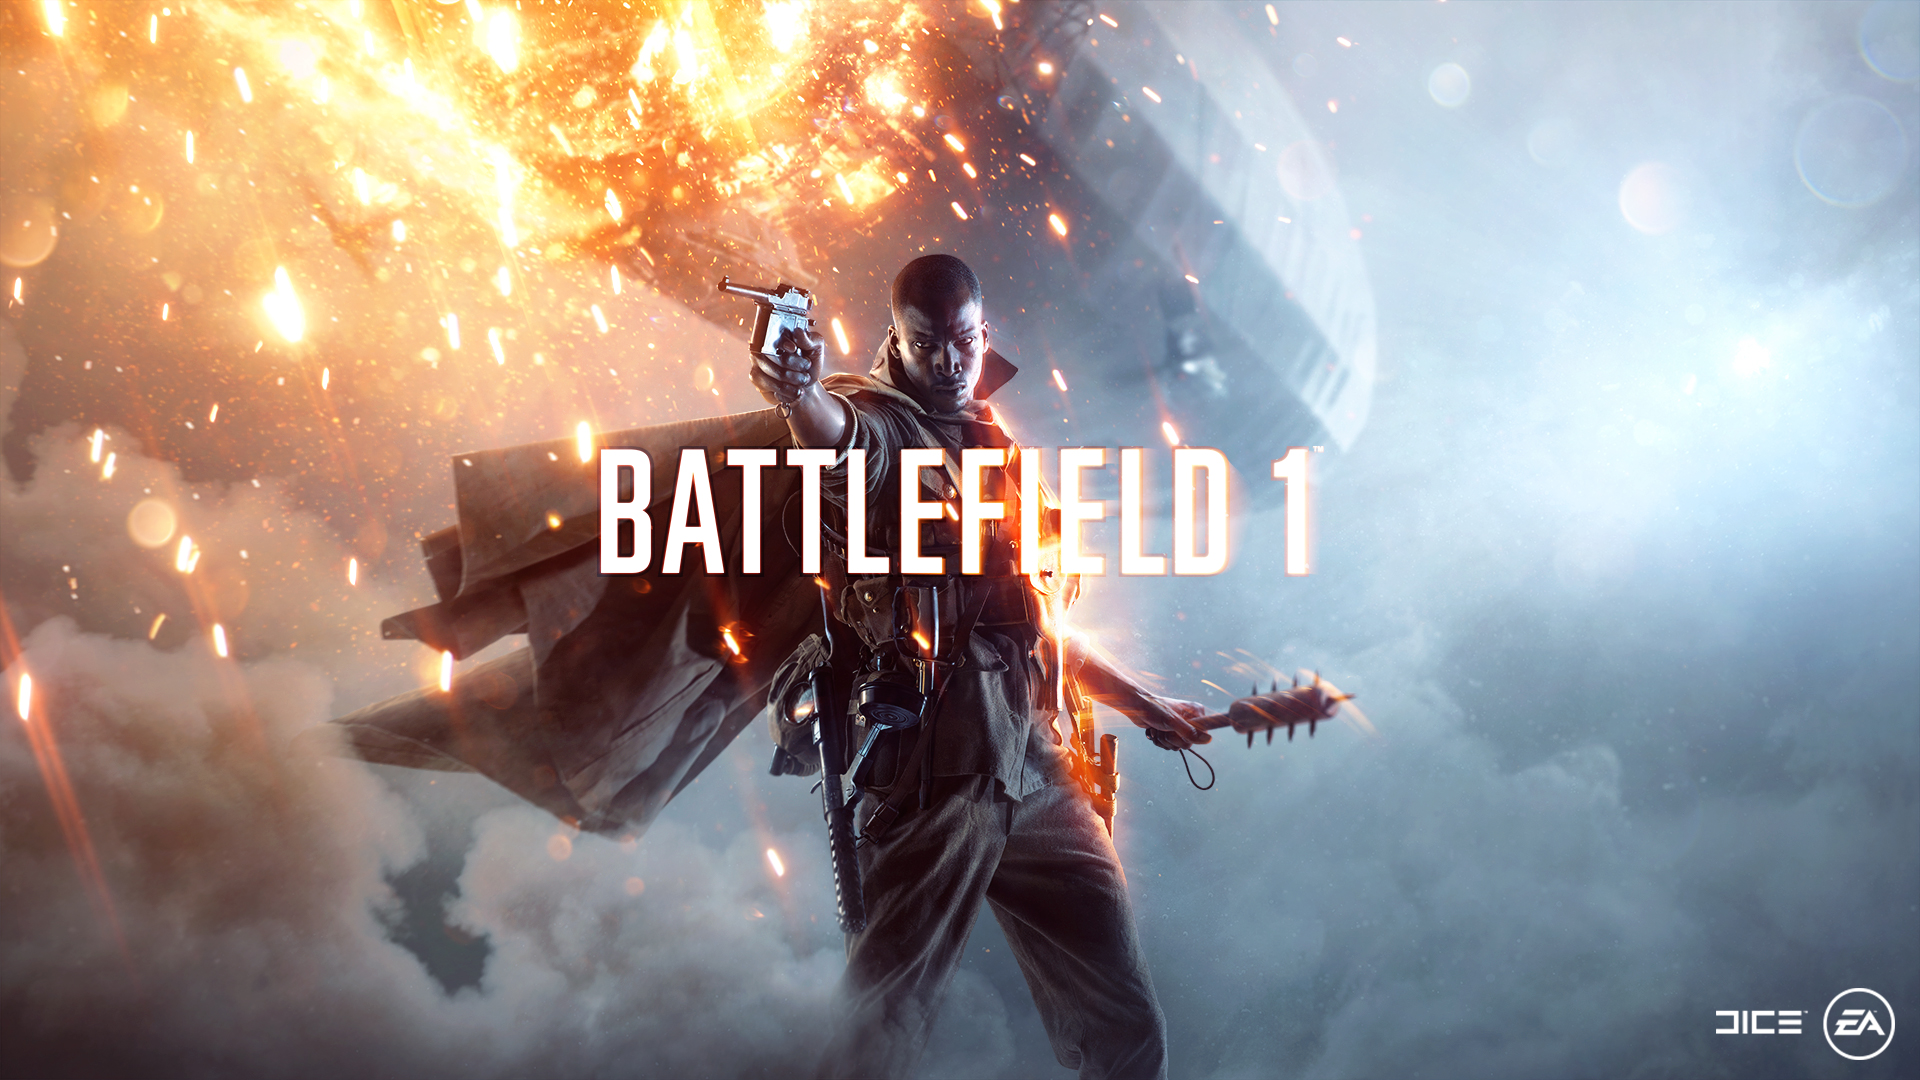 Video For EA Access Members Can Deploy Now for the Battlefield 1 Play First Trial, Exclusively on Xbox One